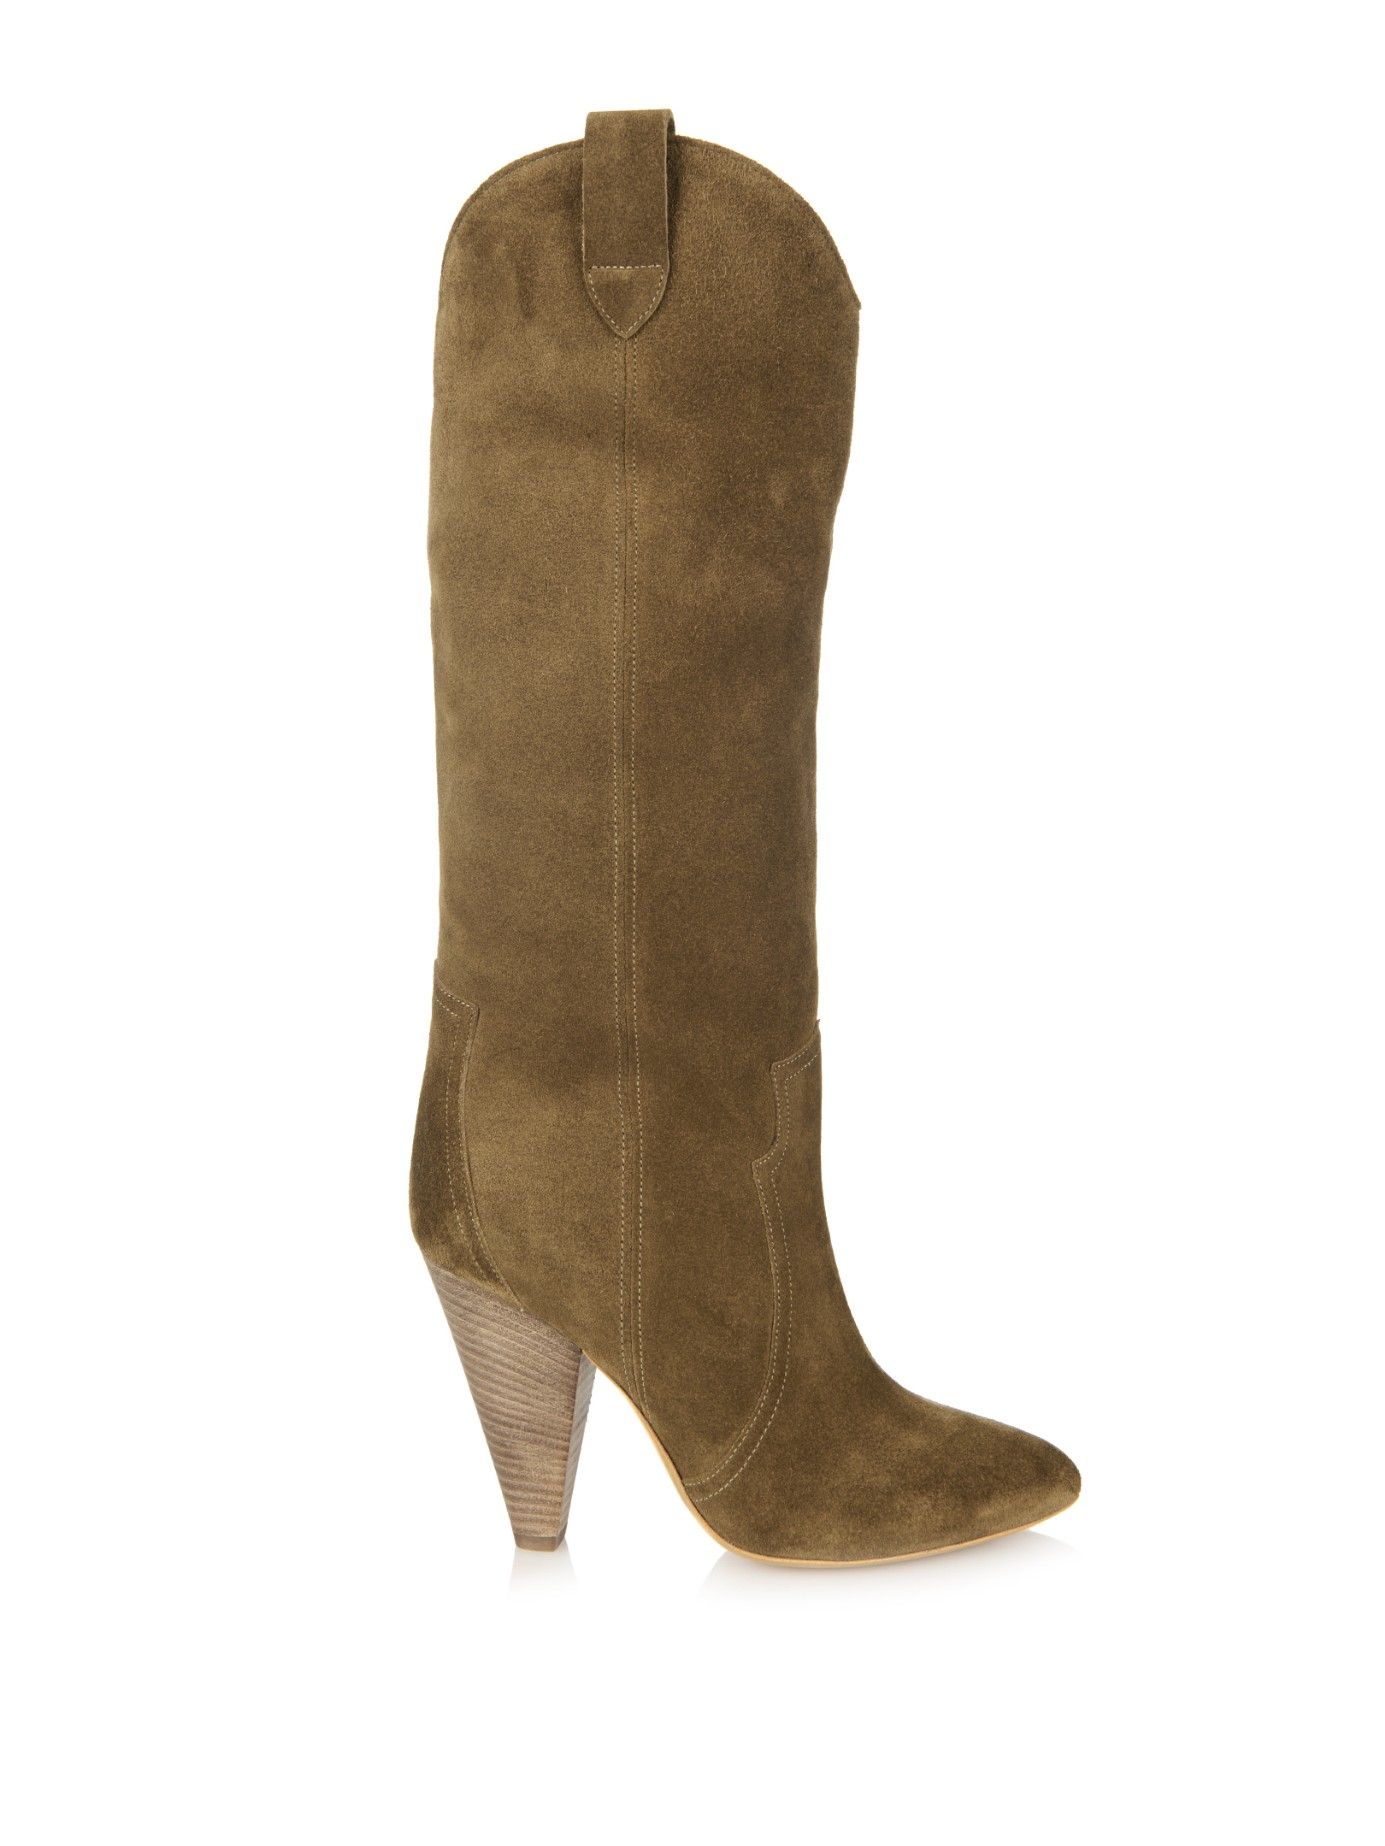 Isabel Marant Étoile Runa Suede Boots in Brown | Lyst